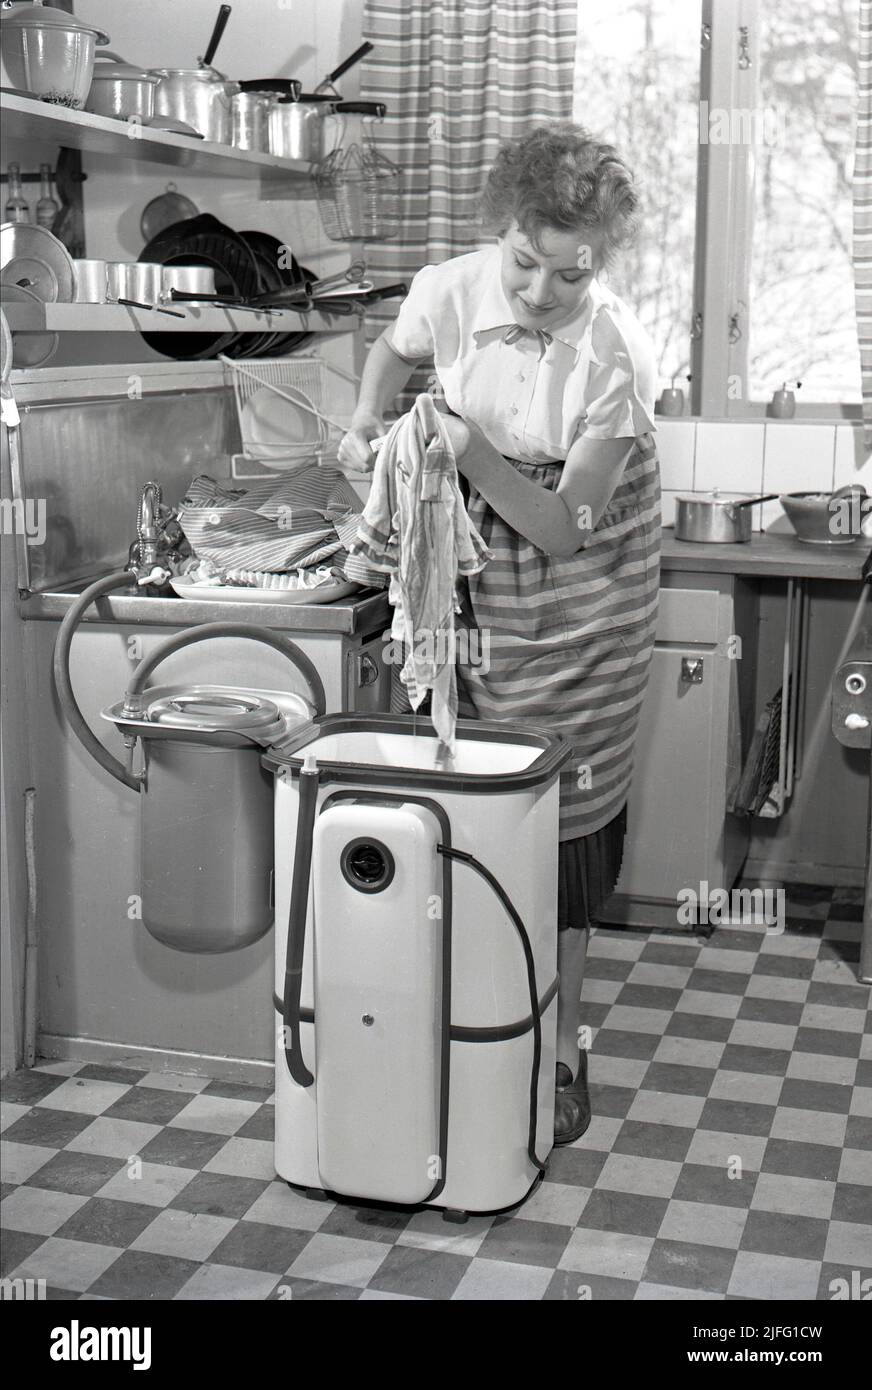 Doing the laundry in the 1950s. A lady is using a washing machine in the kitchen. A typical 1950s kitchen with a sink and pots and pans on the shelves above.  Sweden 1953 ref 2317 Stock Photo